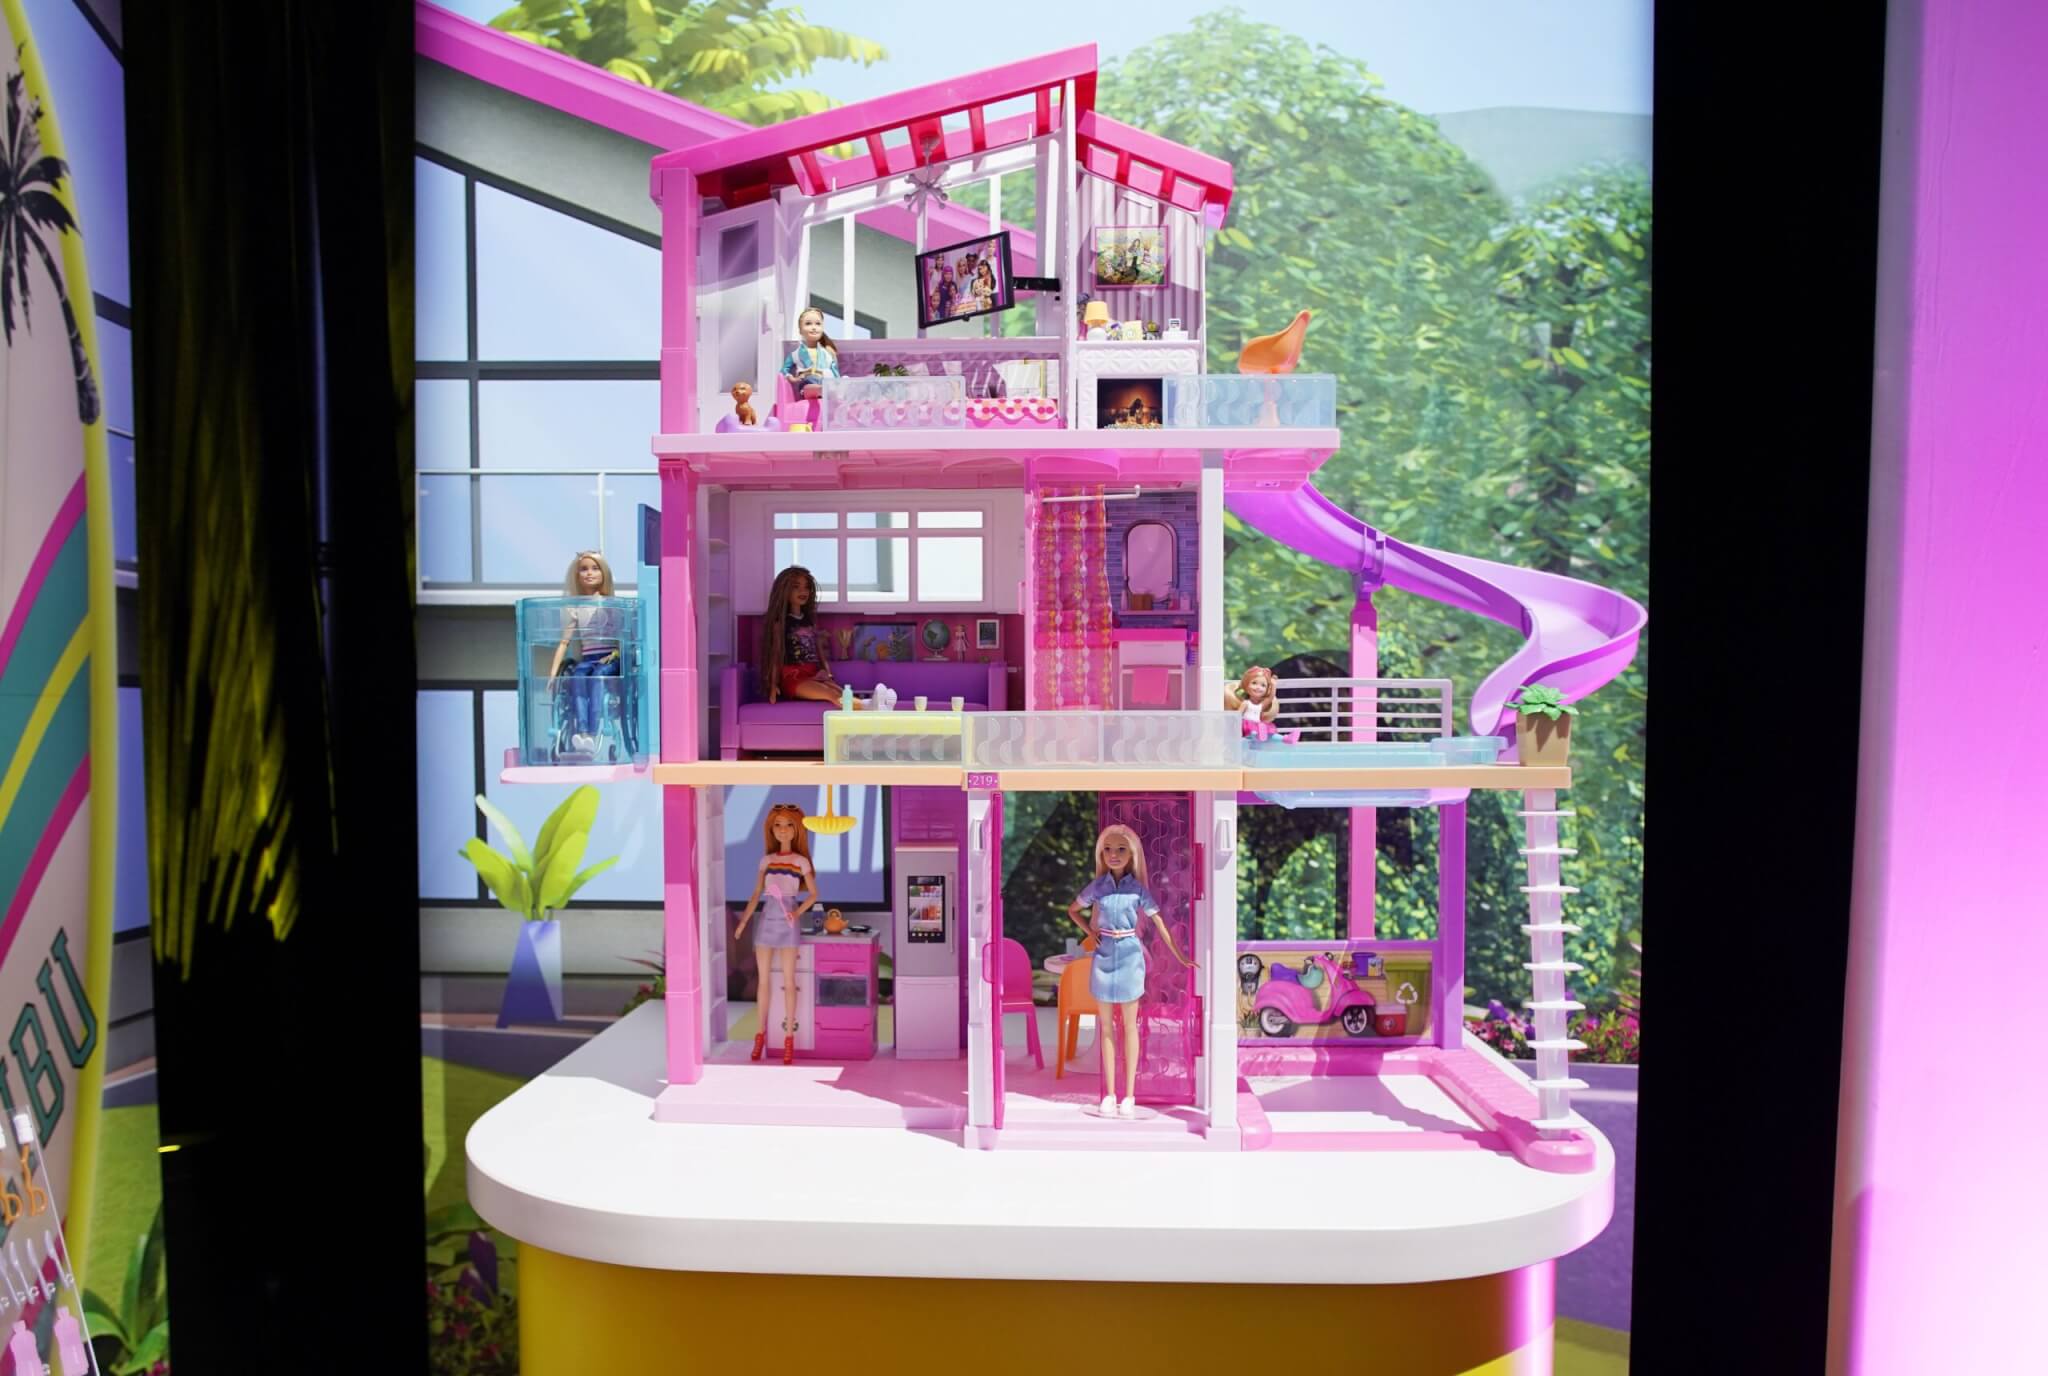 A Barbie House from Mattel is on display at 117th American International Toy Fair at the Jacob K. Javits Convention Center in New York City on Saturday, February 22, 2020. This is largest toy and youth product marketplace in the Western Hemisphere, bringing together more than 1,000 exhibiting manufacturers, distributors, importers and sales agents from around the globe to showcase their toy and entertainment products.